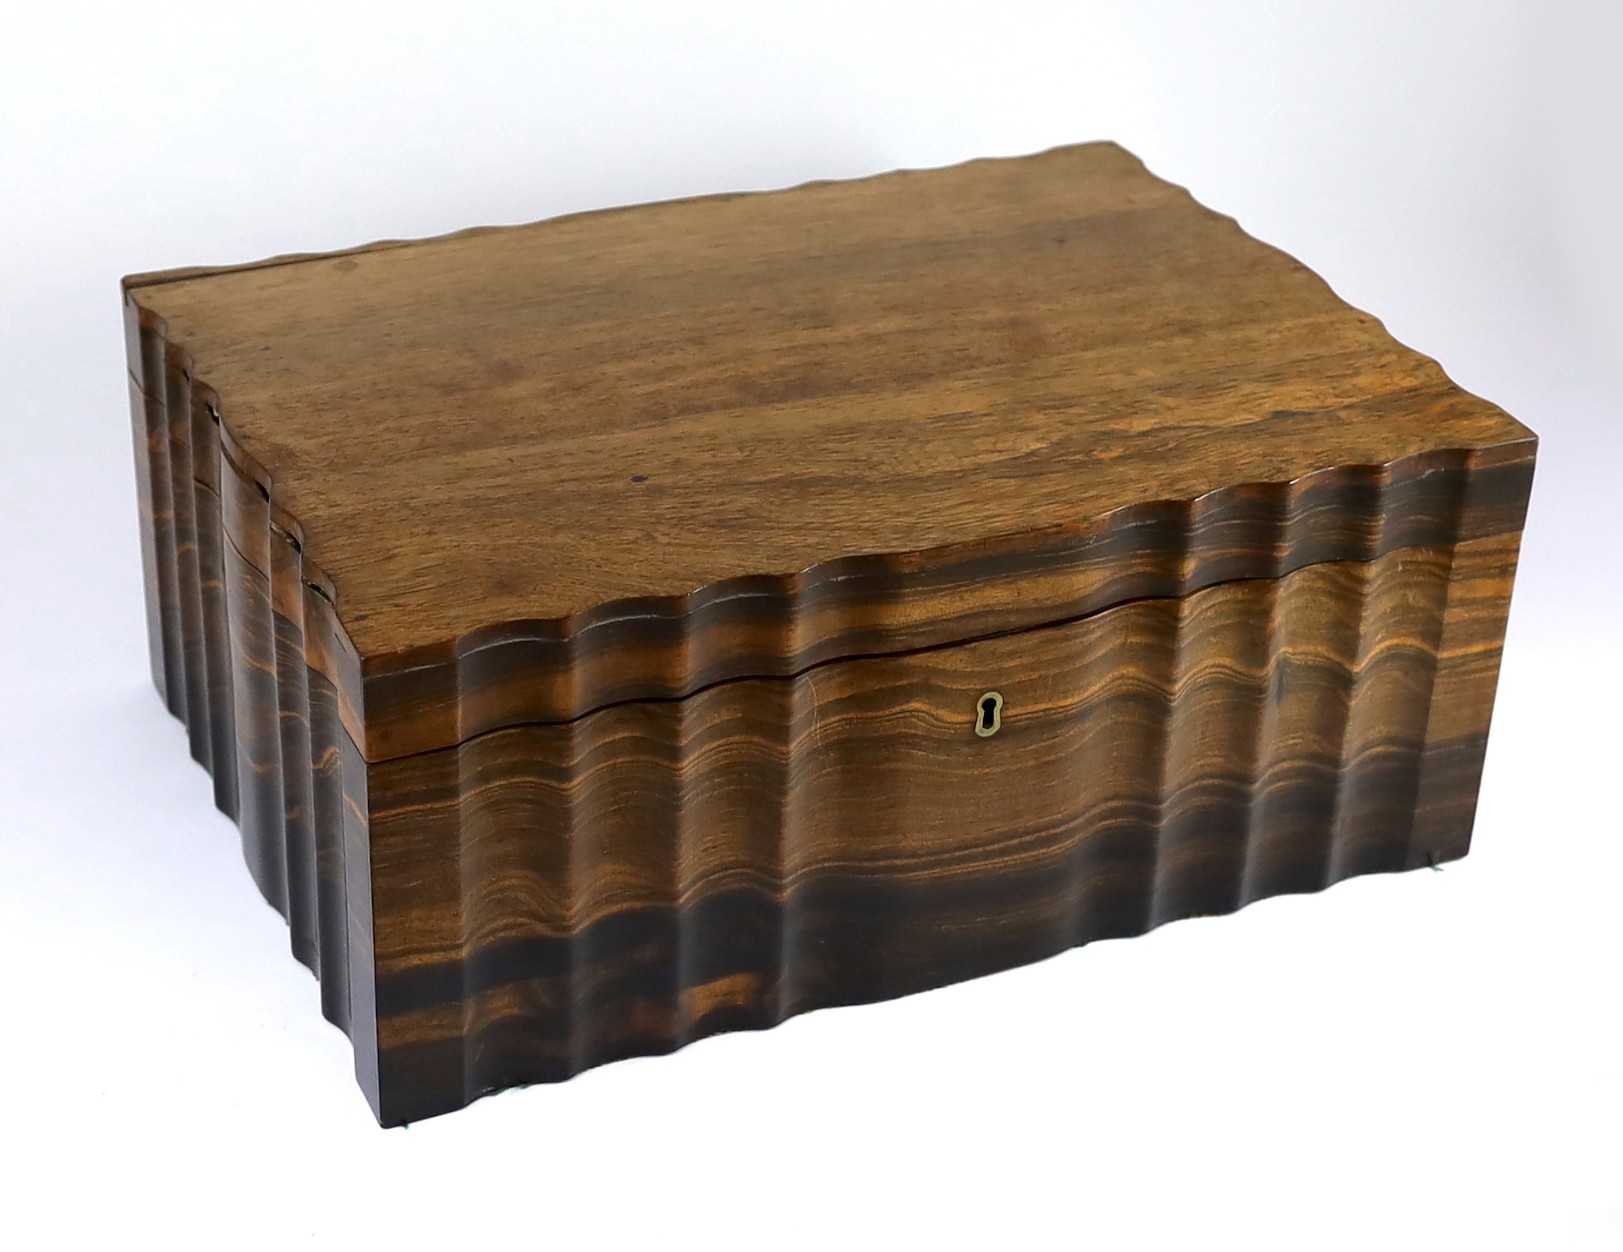 A mid 19th century Anglo Indian ivory inset ebony and other exotic hardwood travelling casket, 44cm wide 32cm deep 19cm high